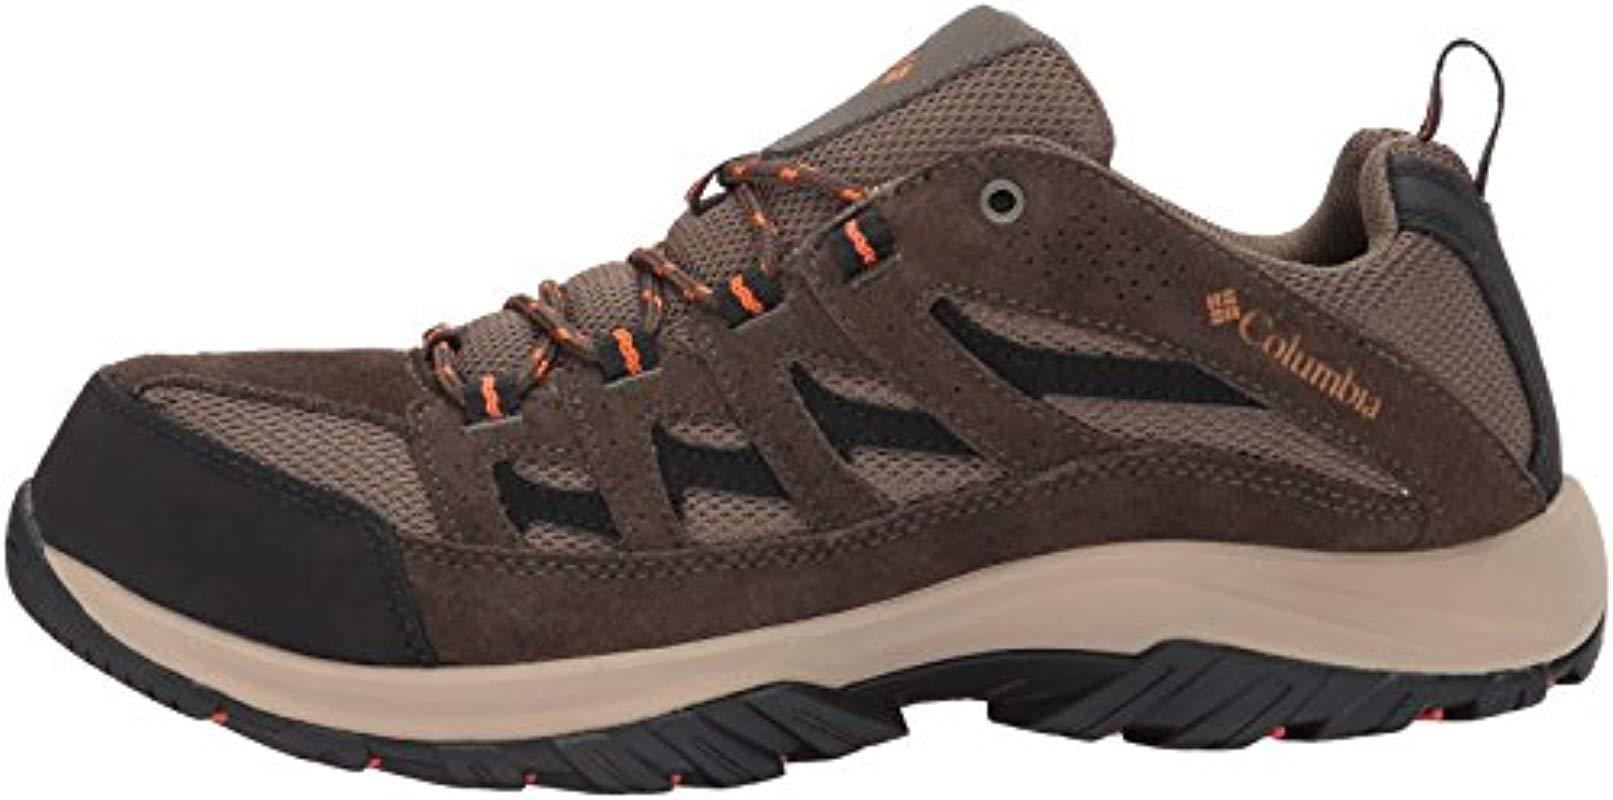 Columbia Crestwood Wide Hiking Shoe in Brown for Men - Save 51% - Lyst